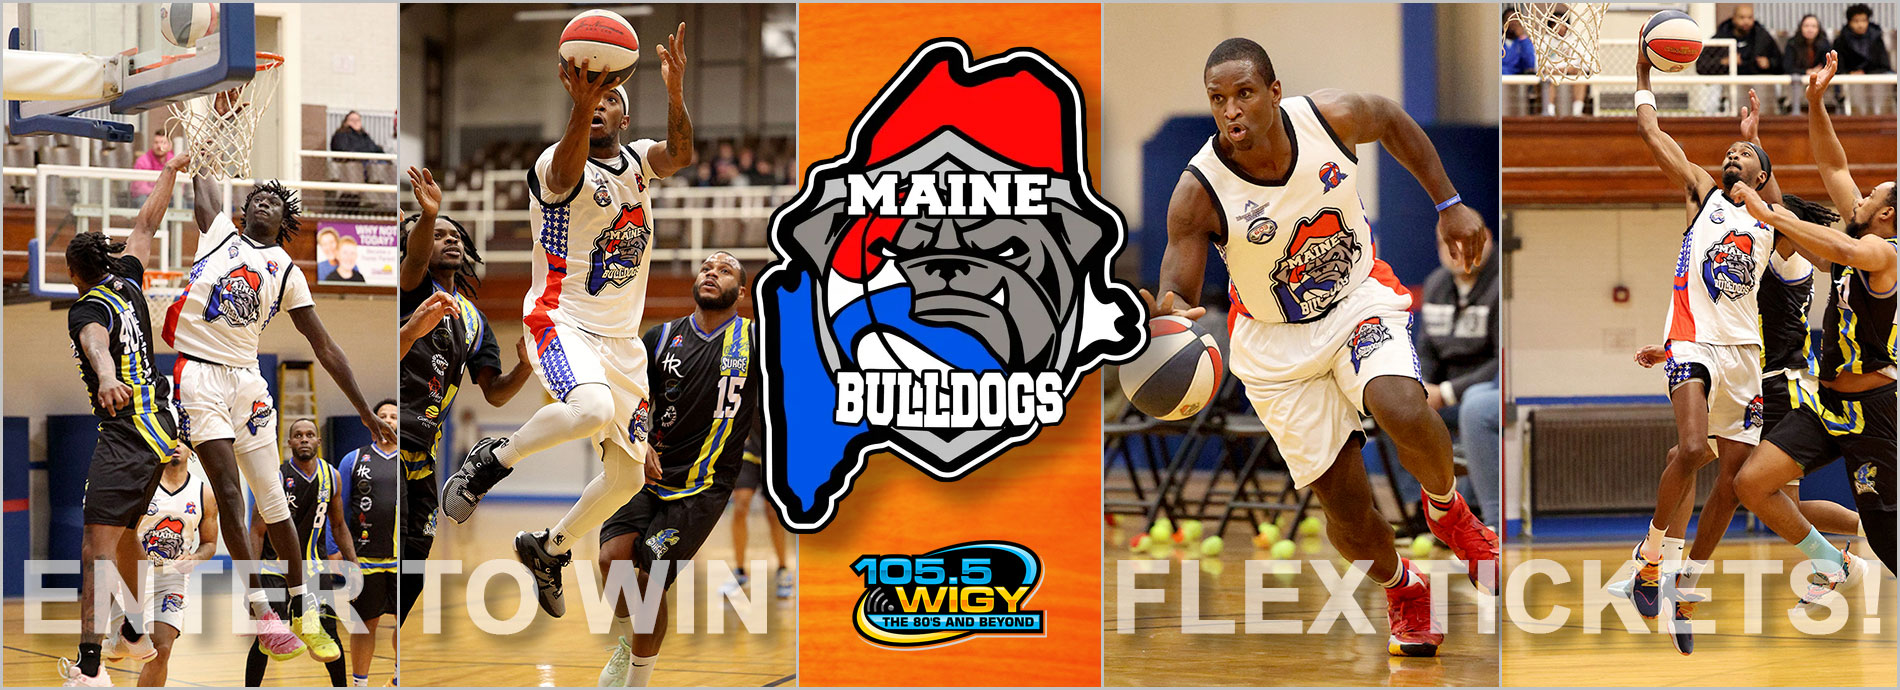 Enter to Win Maine Bulldogs Tickets with WIGY!